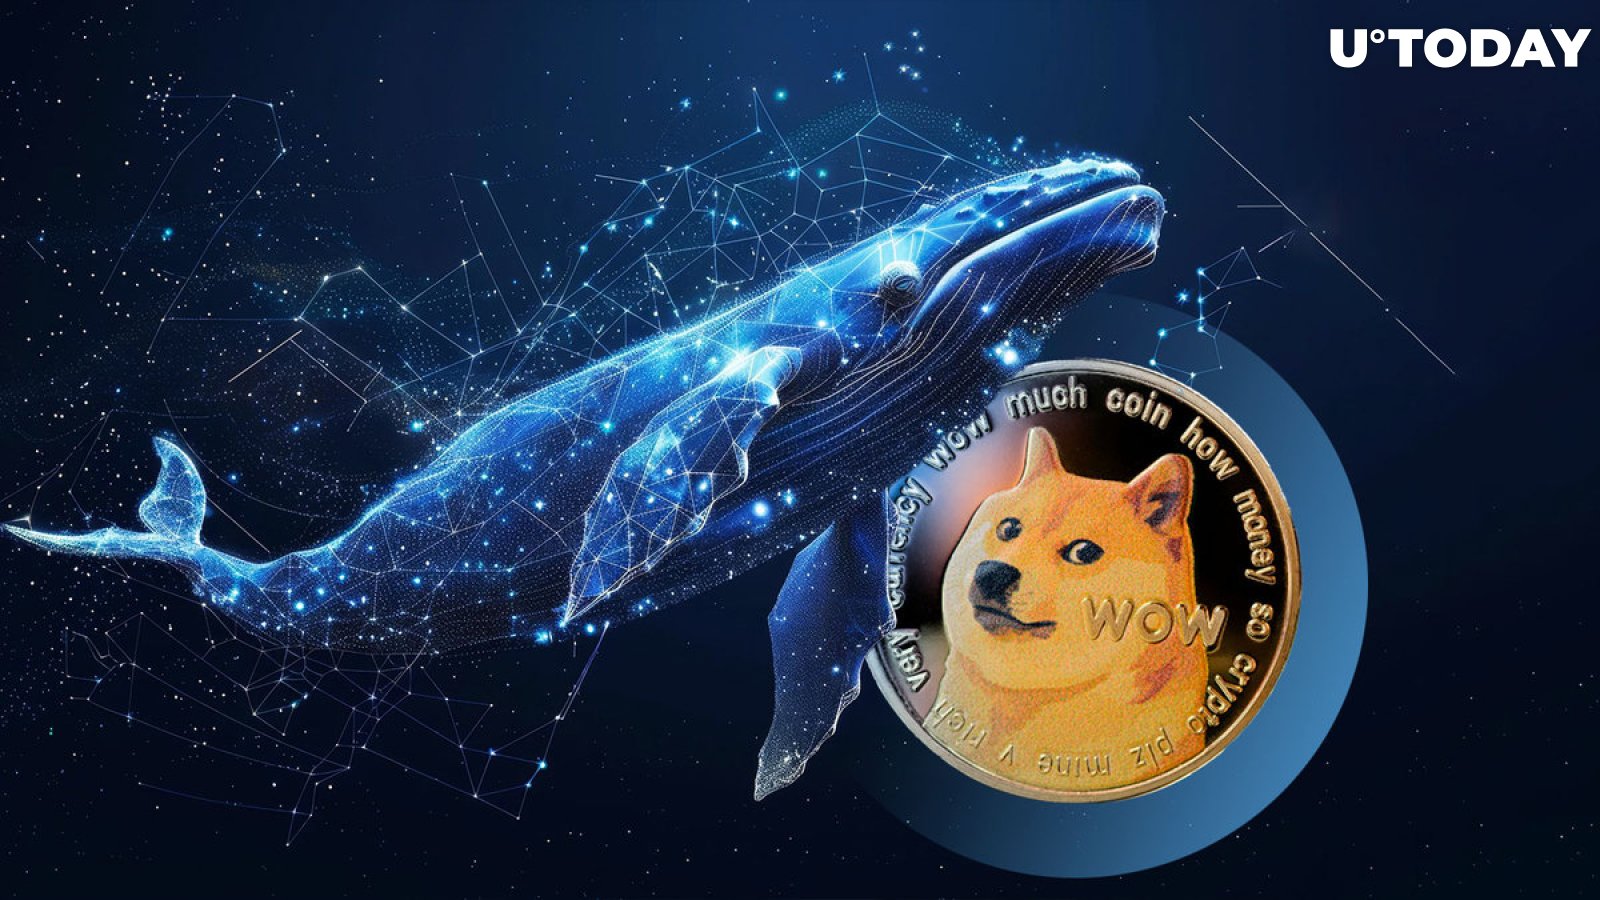 The former Dogecoin whale returns after 10.4 years: what did they do next?